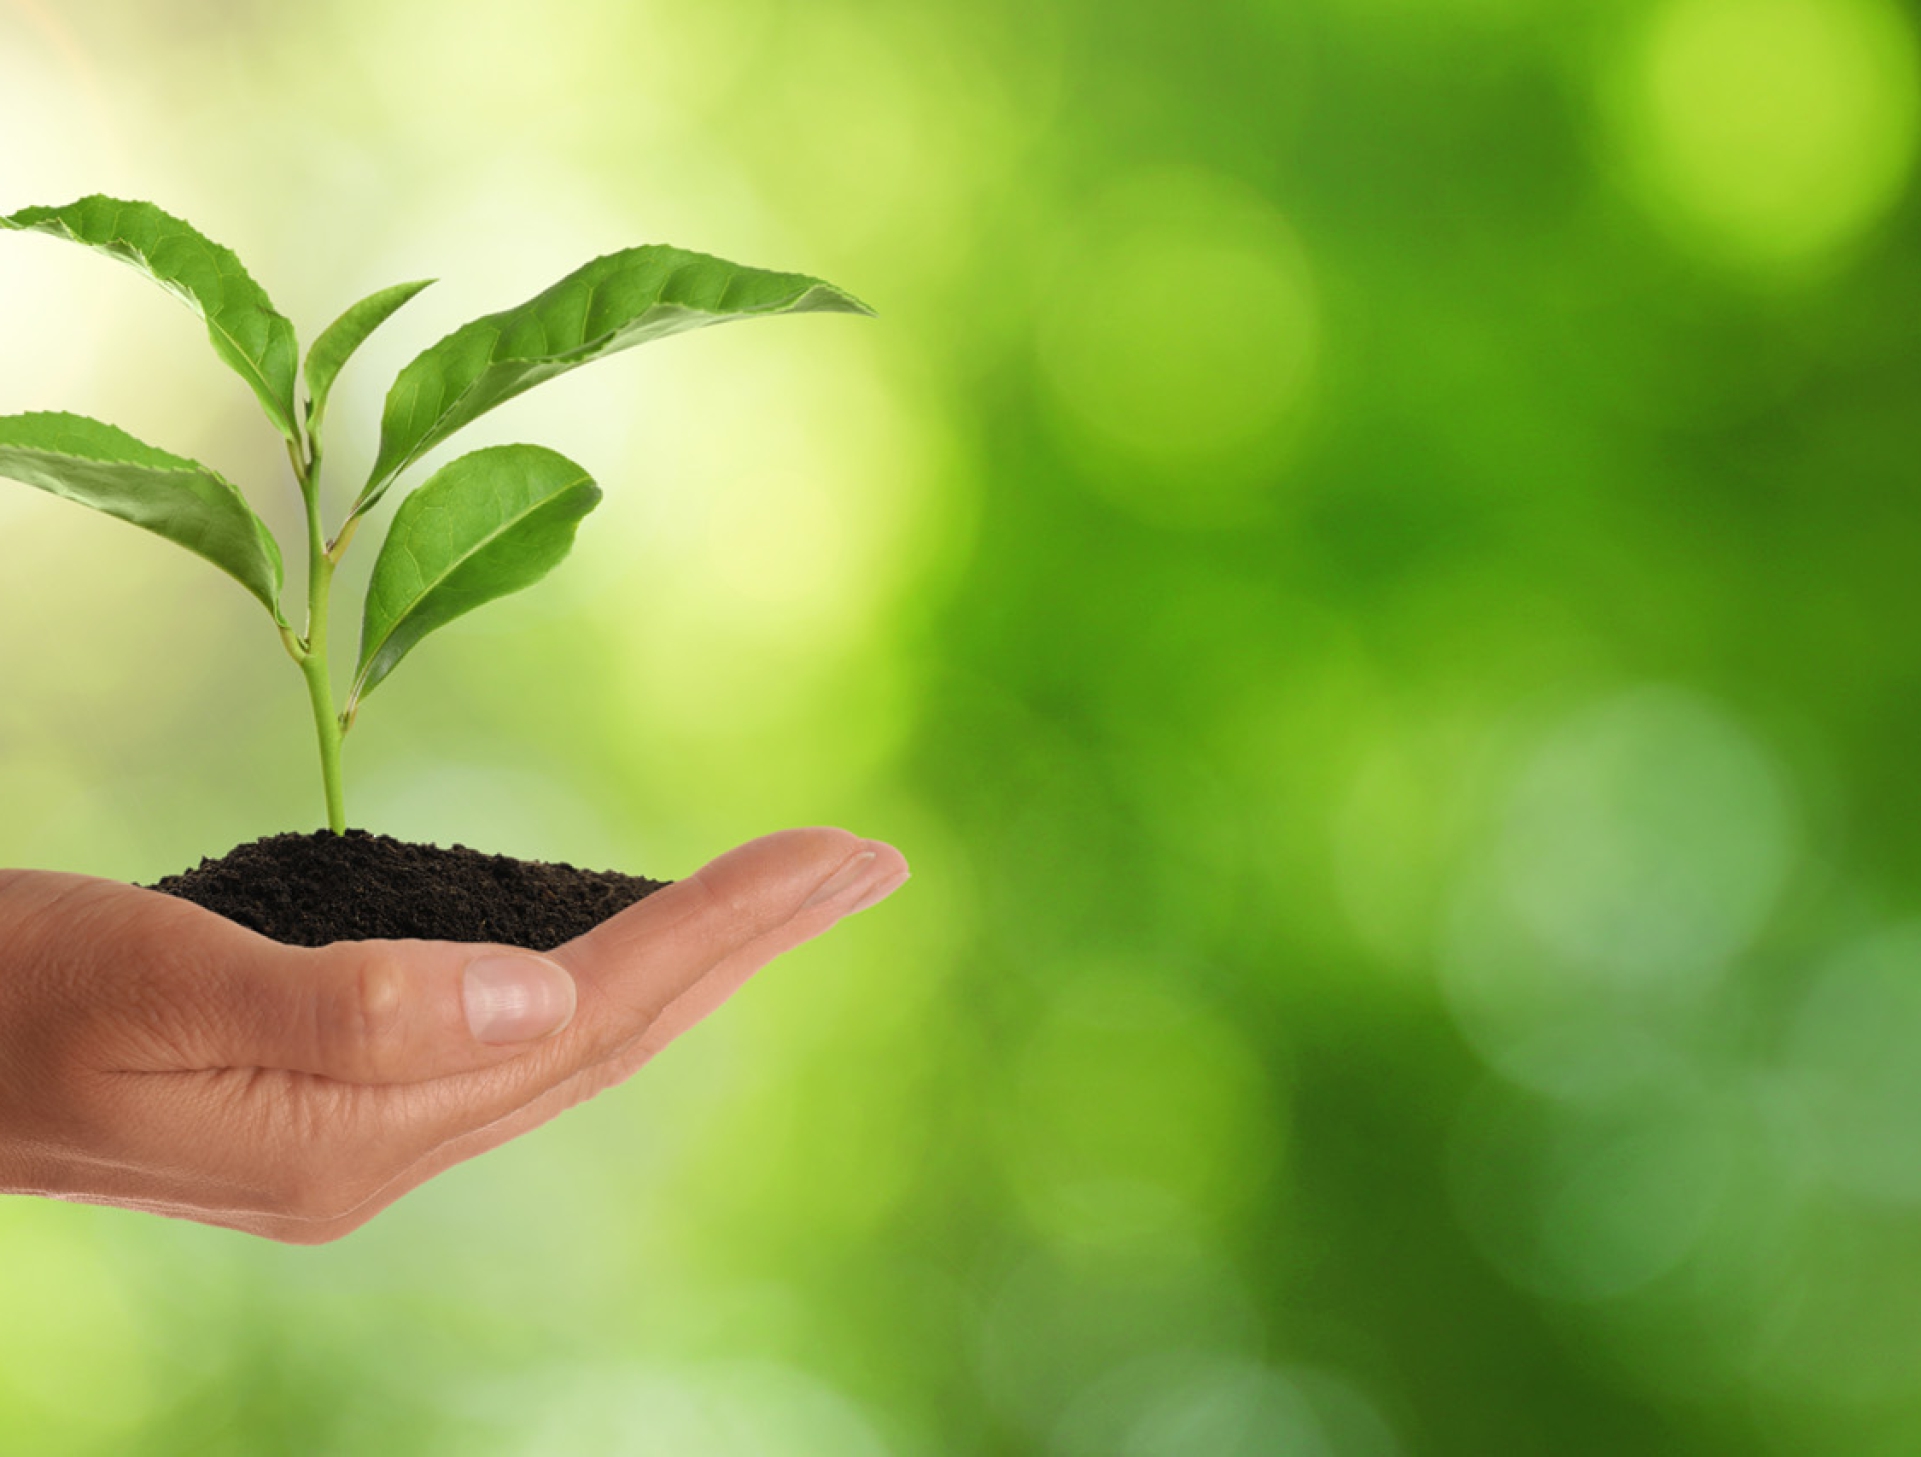 Closeup view of woman holding small plant in soil on blurred background, banner design with space for text. Ecology protection